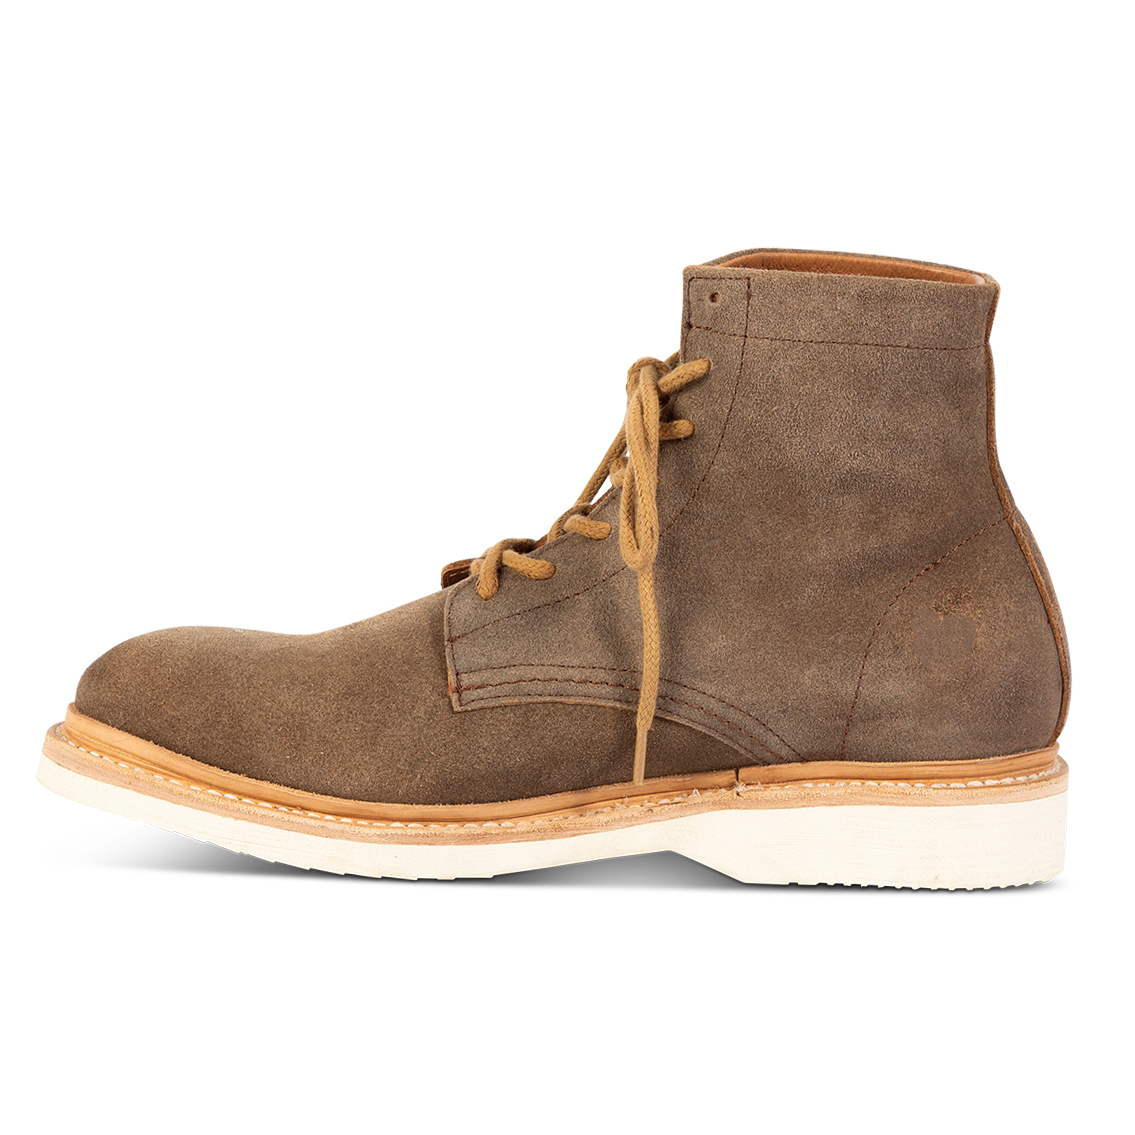 Inside view showing contrasting suede upper and soft sole on FREEBIRD men's Wheeler taupe suede shoe